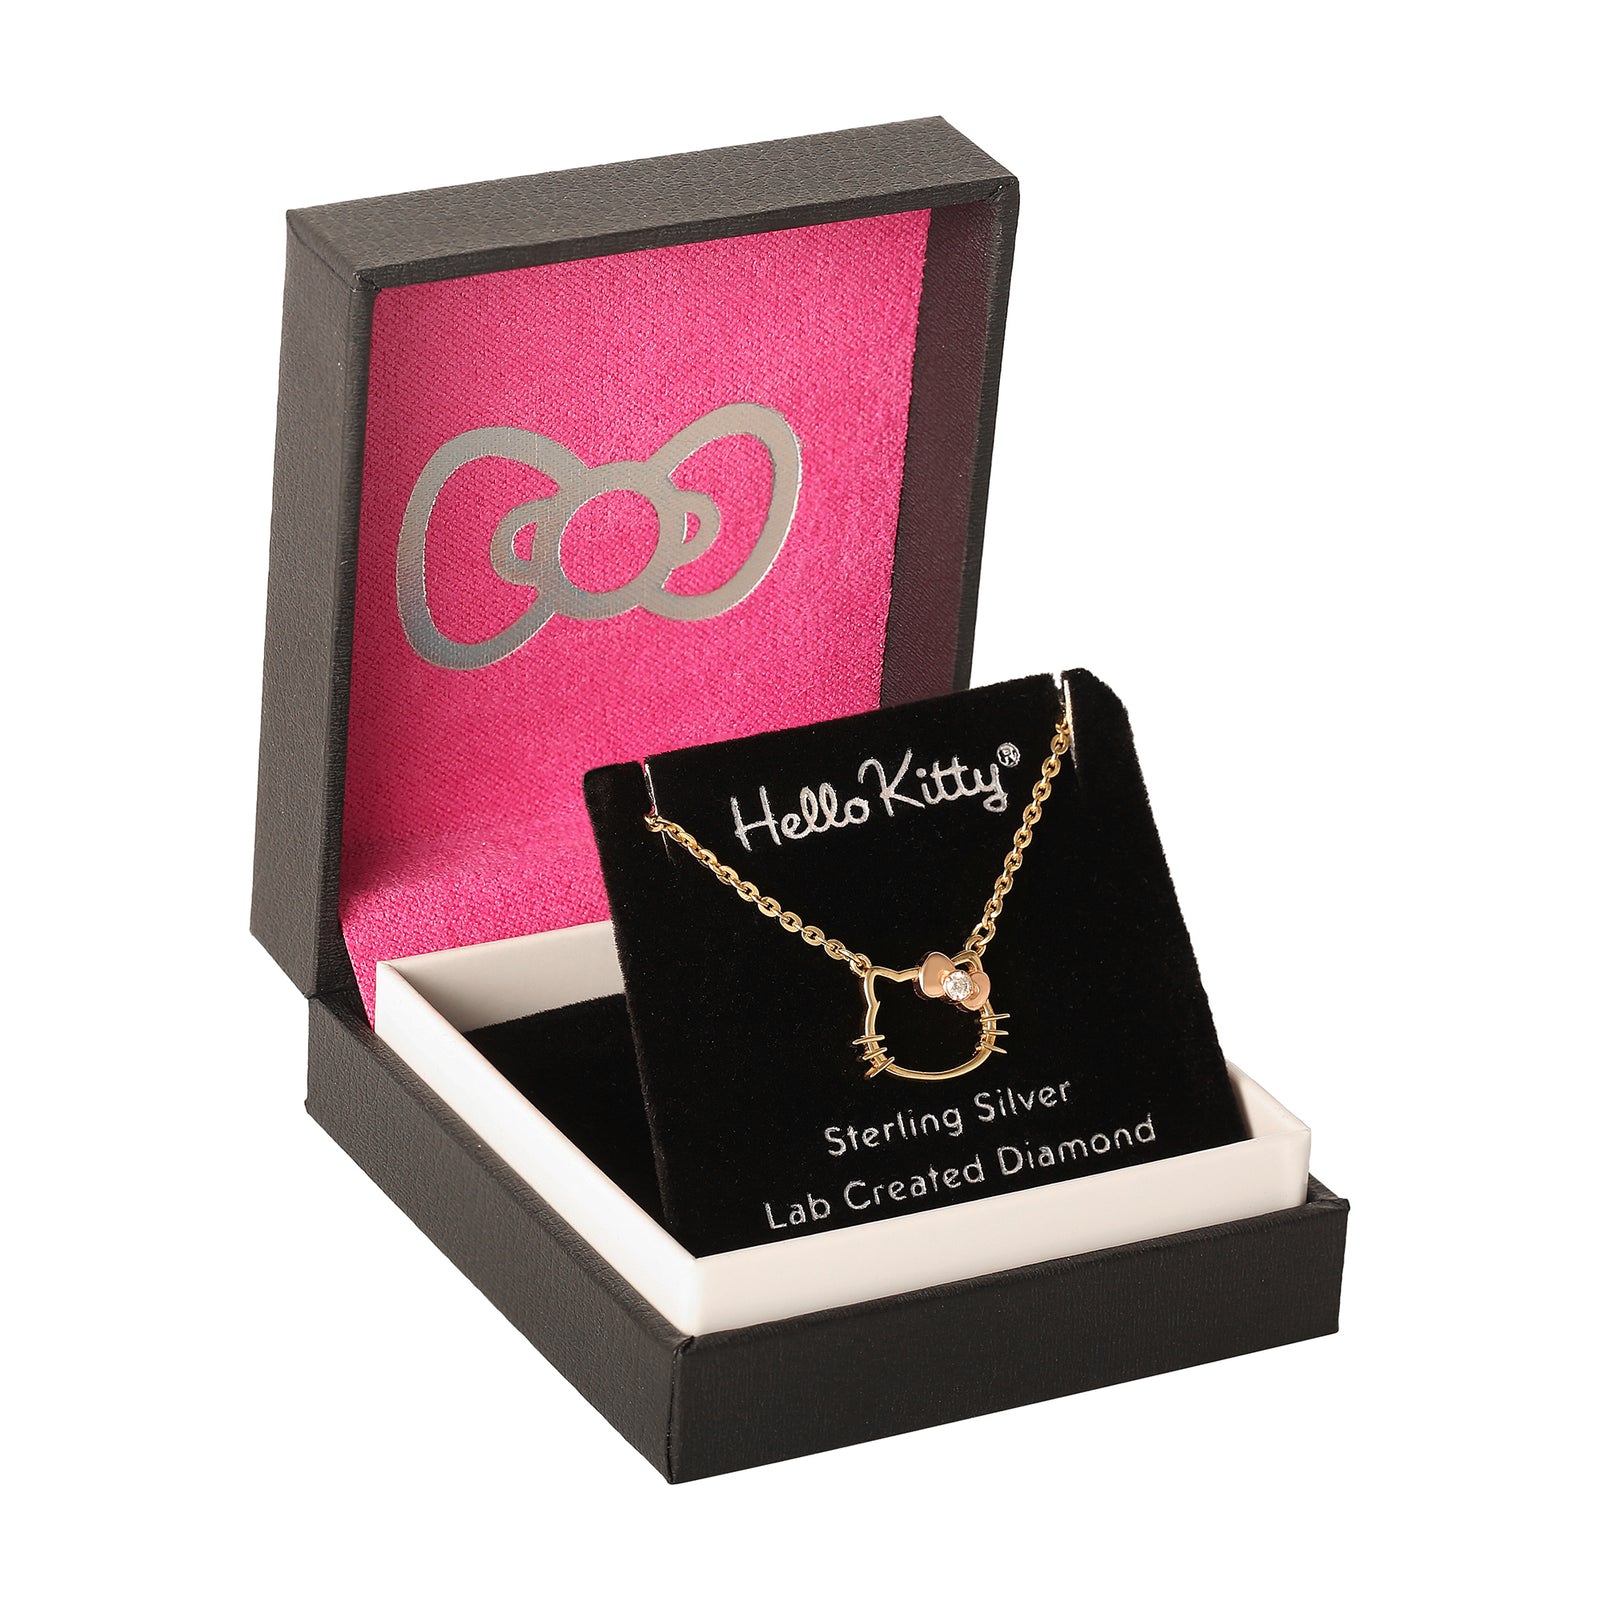 Cinnamoroll Necklace Gold - $10 (50% Off Retail) - From Sanrio